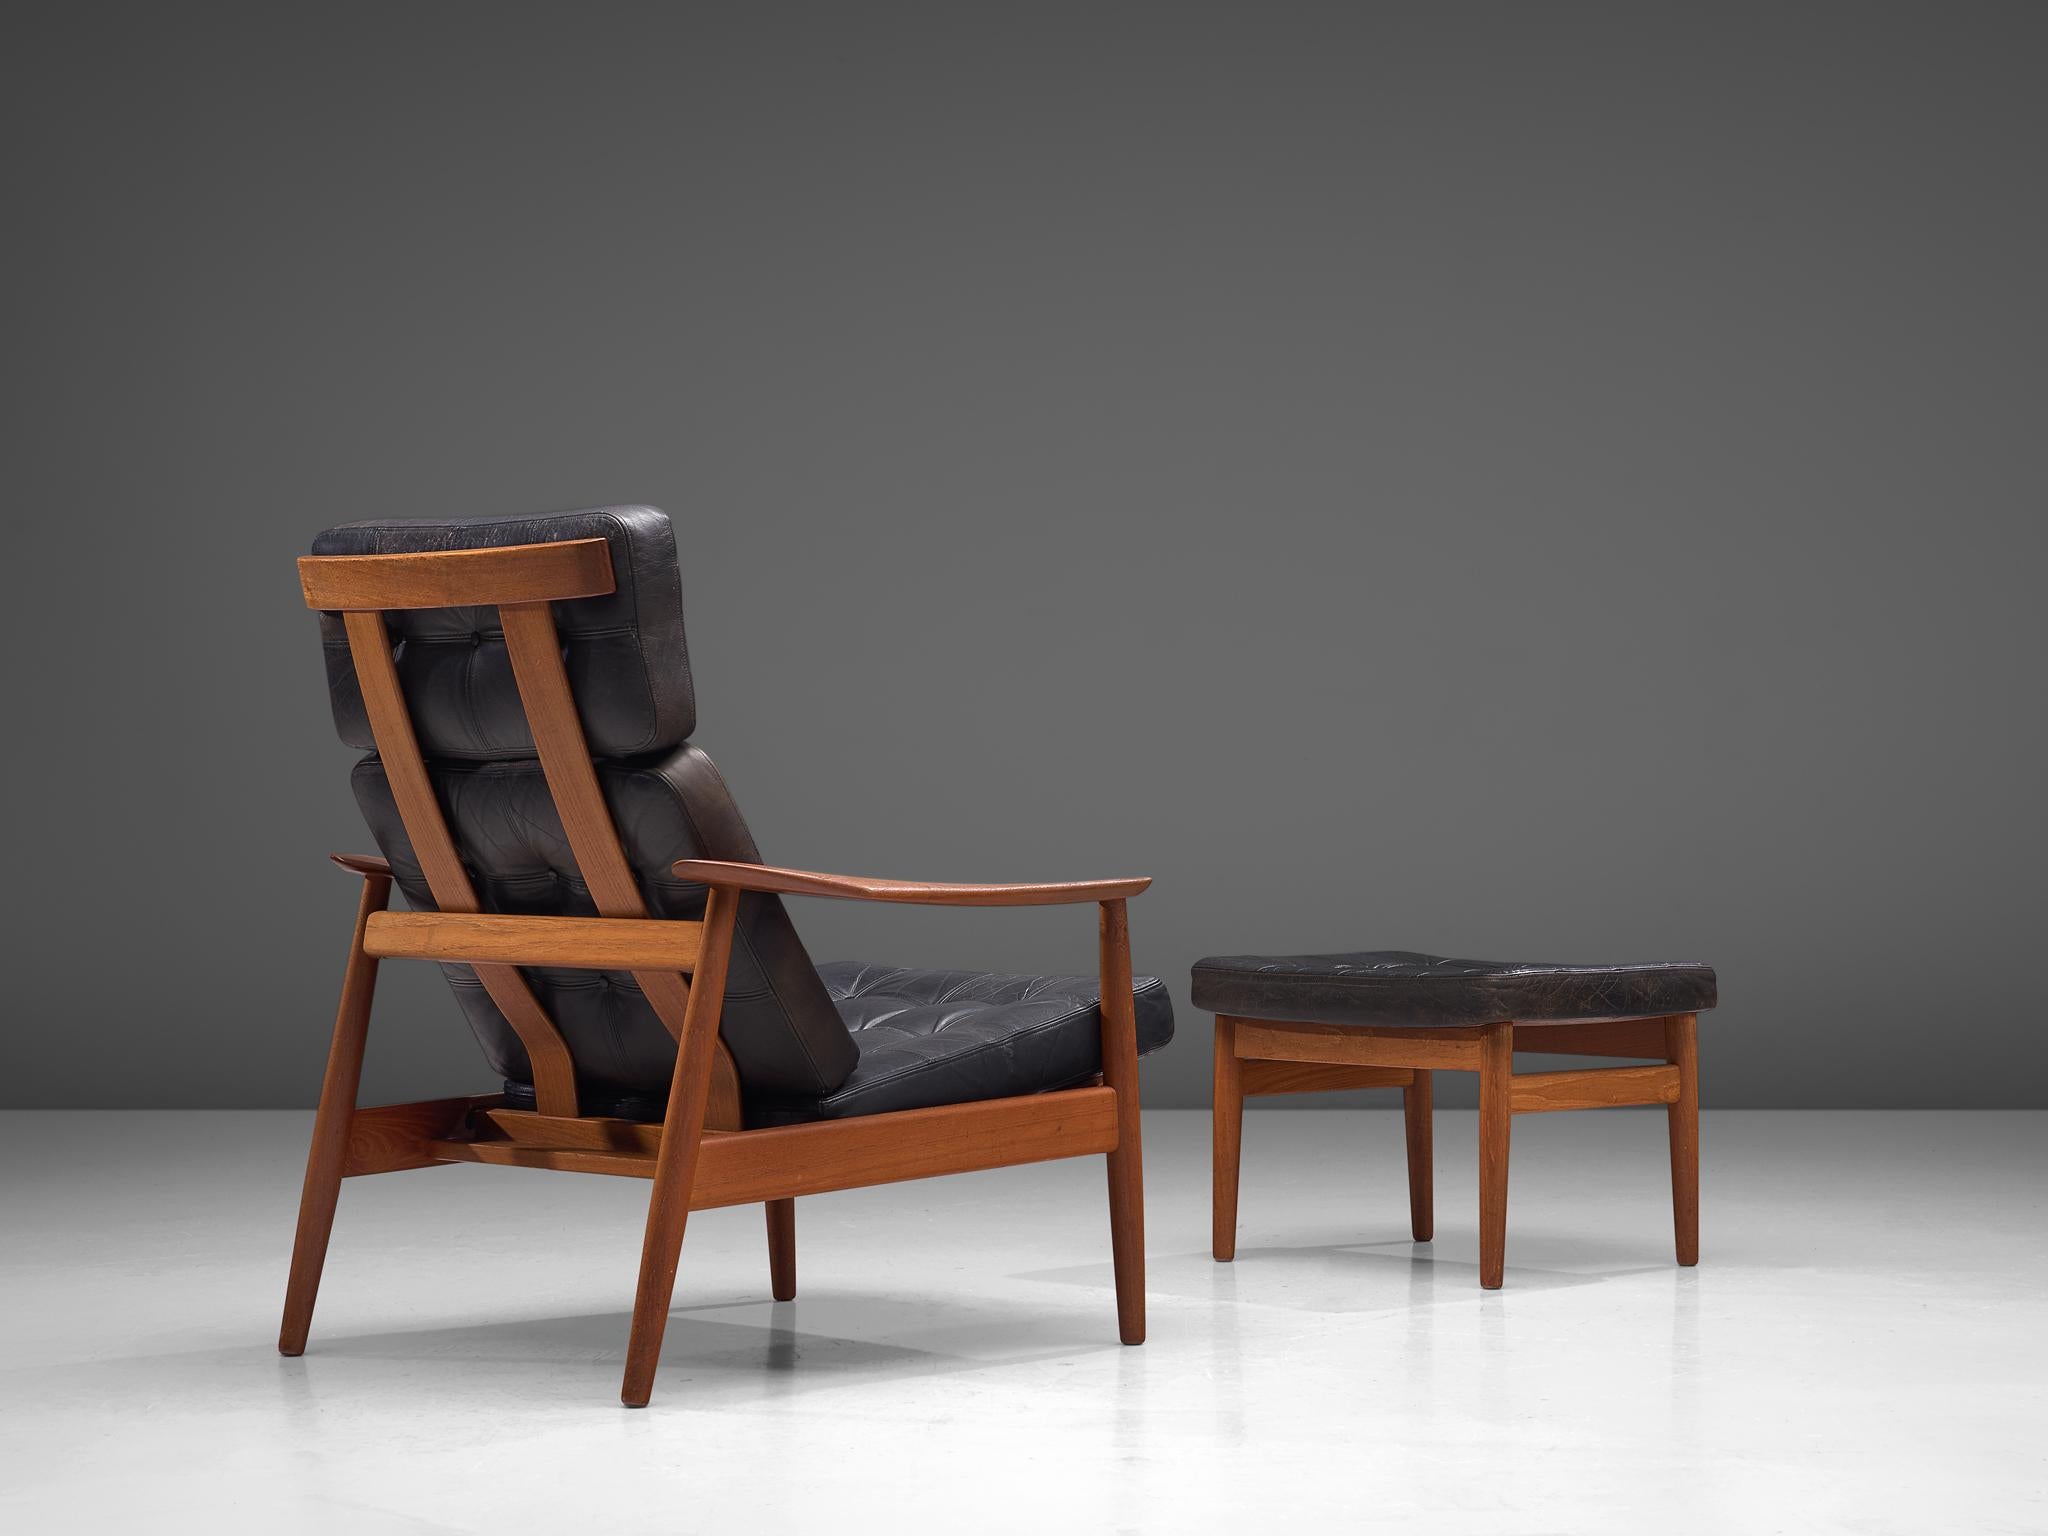 Arne Vodder, lounge chair and ottoman, black leather and teak, Denmark, 1960s

This lounge chair with pouf are good examples of the great craftsmanship of Arne Vodder. A modest design with refined details, such as the beautiful carved